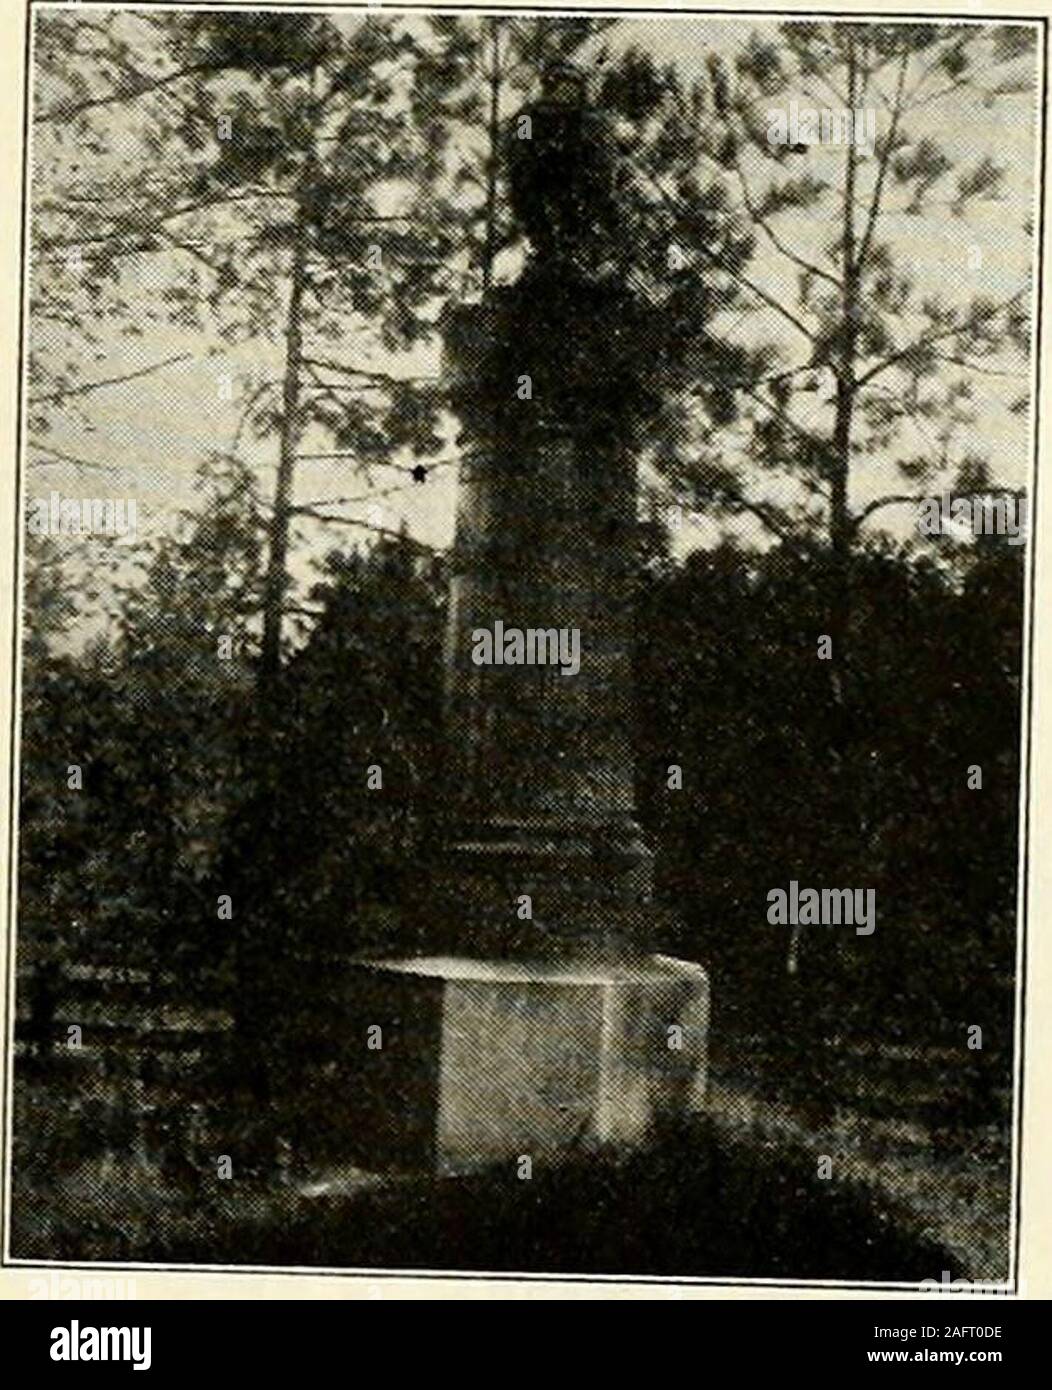 . History of Alabama and dictionary of Alabama biography. Raphael SemmesAt Mobile CONFEDERATE MONUMENTS HISTORY OF ALABAMA 995 uated near the end of Sequatchee (BrownsValley). They contain some constituents inrelatively large quantities of mineral watersnot found in the State. There is much sul-phuretted hydrogen and lithium, and salts ofbarium and strontium also present in them. Borden-Wheeler Springs, Claiborne County.—These Springs are situated on the SeaboardAir Line Railroad, and are frequently visitedas a resort. Bromberg Springs, Mobile County.—Lo-cated near Bayou La Batre, on land owne Stock Photo